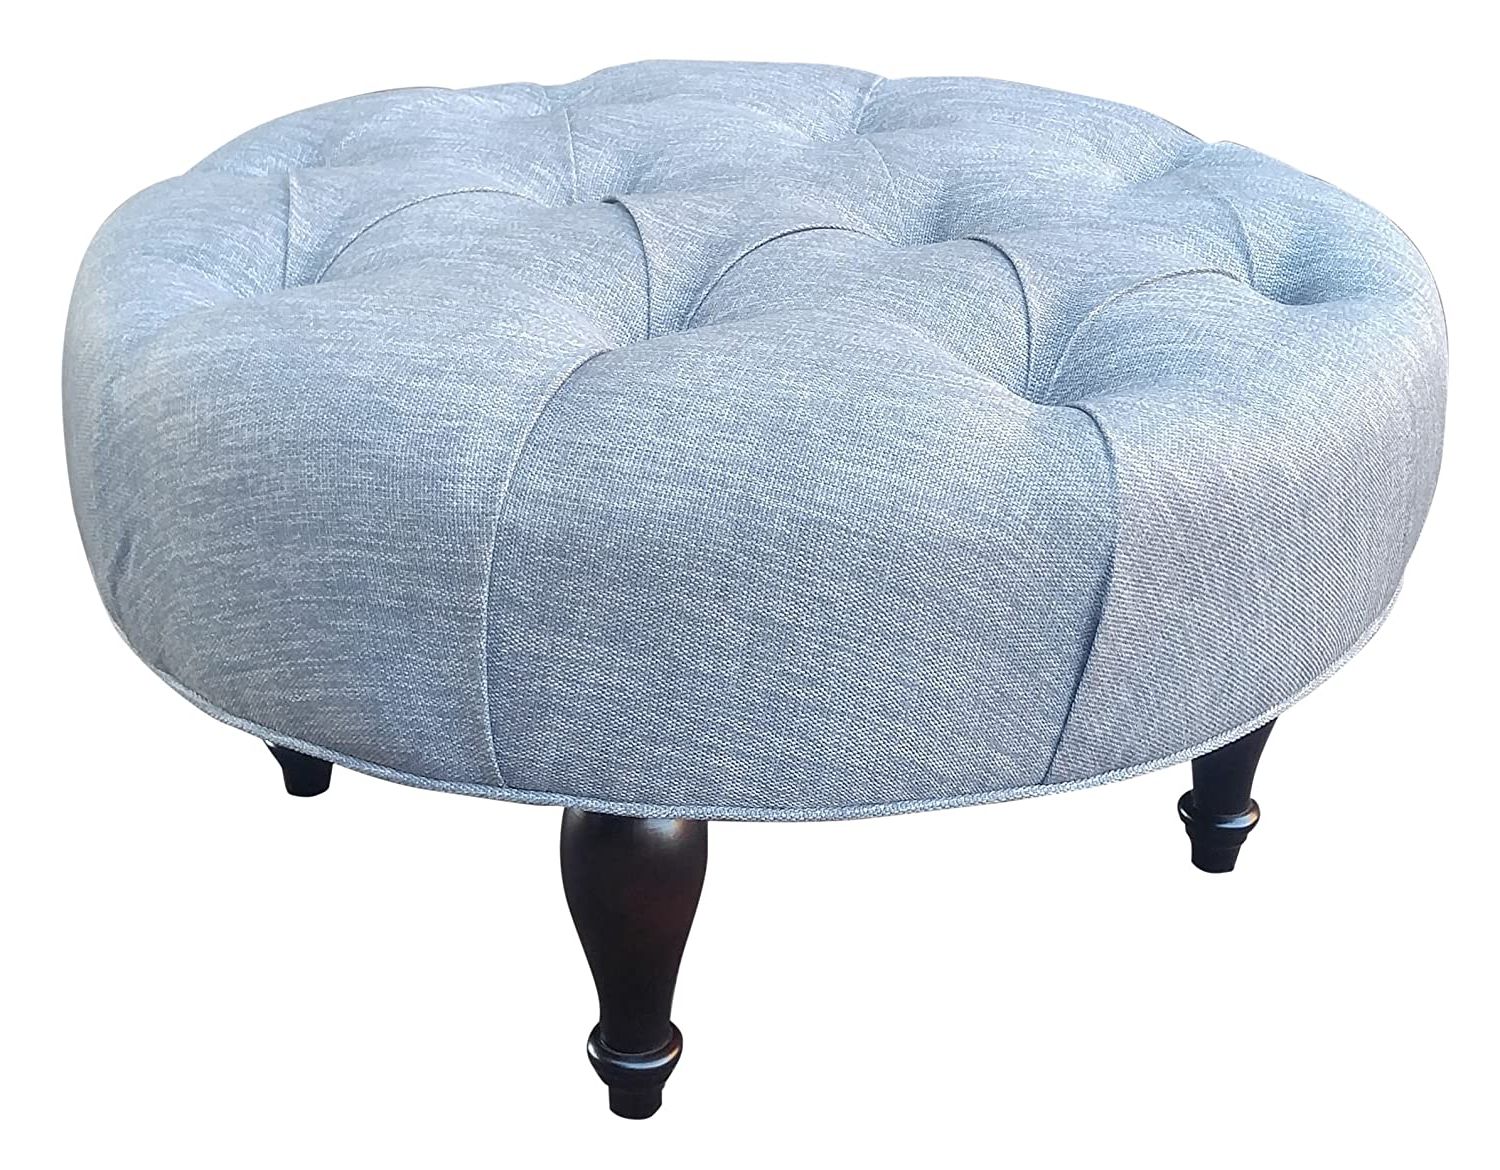 Amazon: Tufted Round Ottoman, 30" Heathered Grey Fabric: Handmade In Most Popular Light Gray Tufted Round Wood Ottomans With Storage (View 4 of 10)